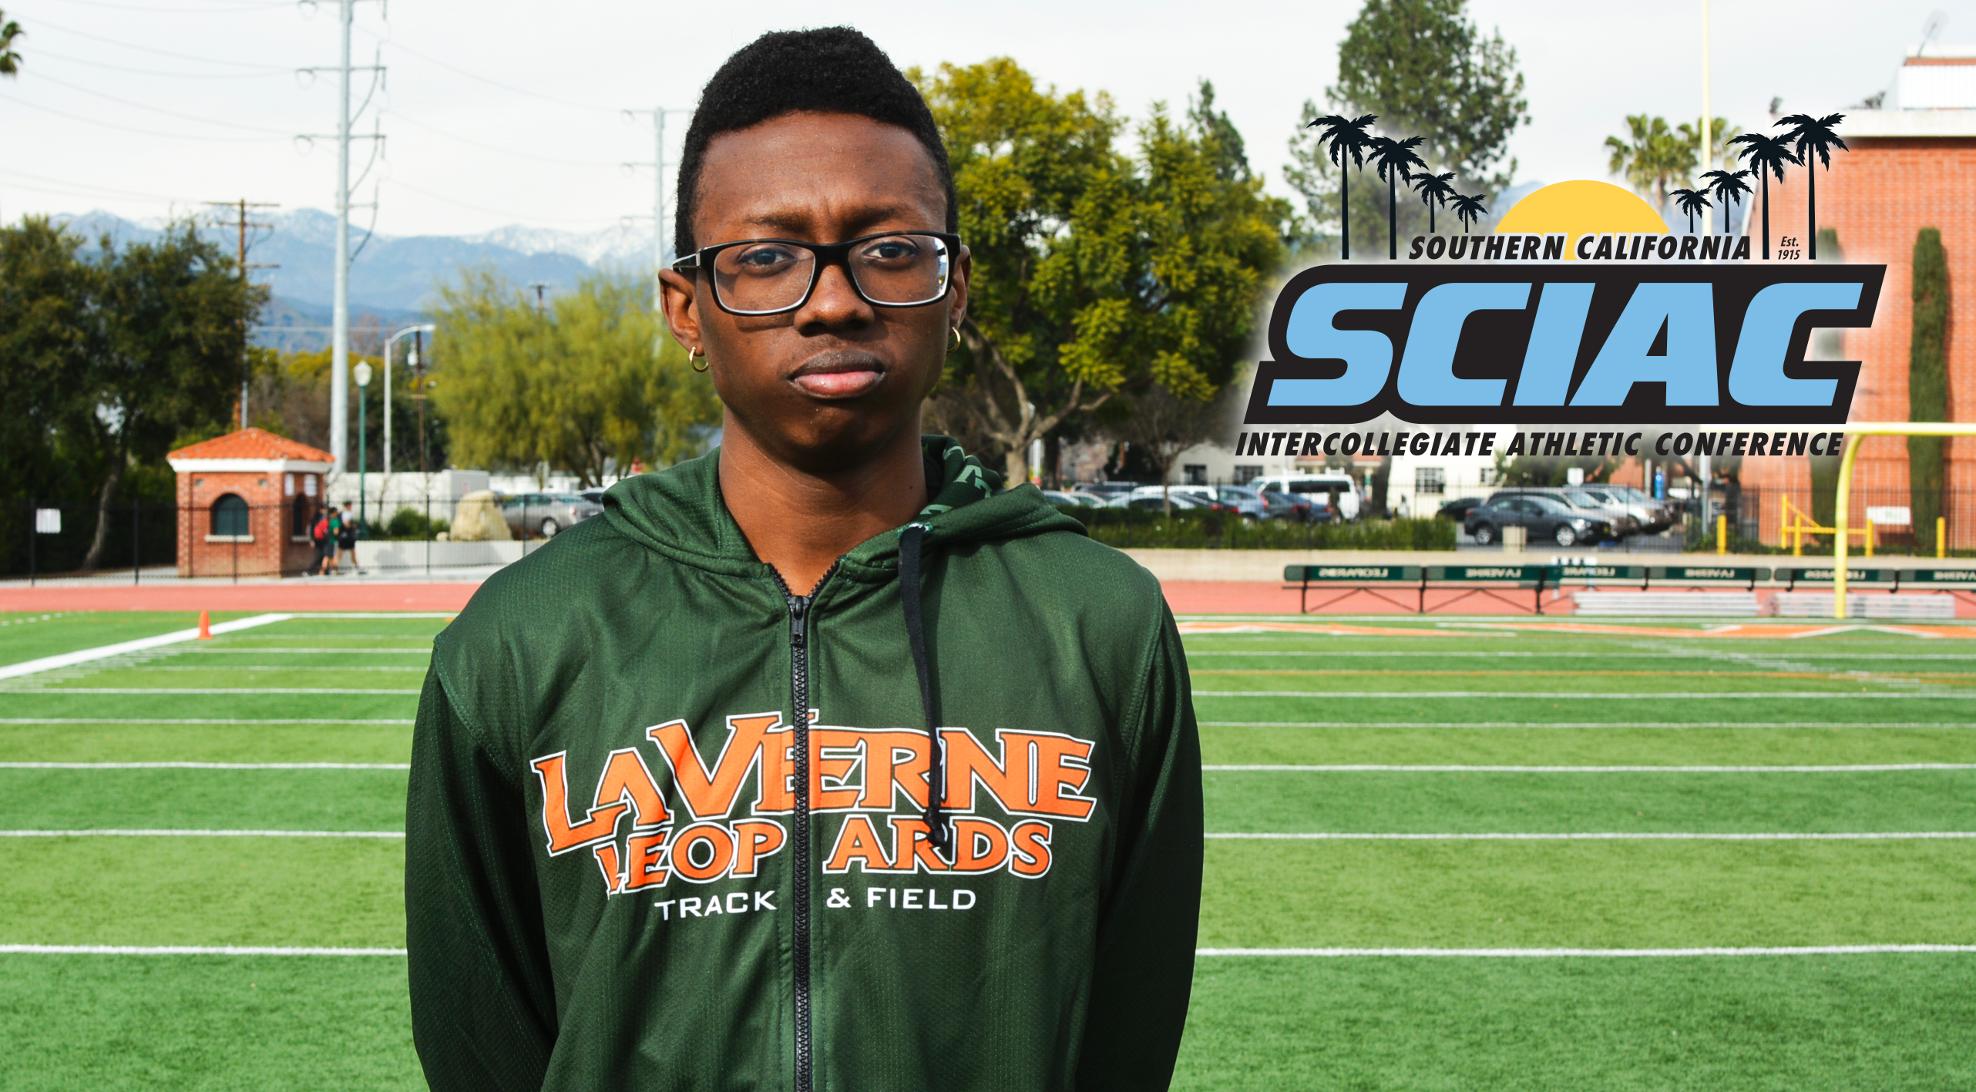 Francis named SCIAC Male Athlete of the Week